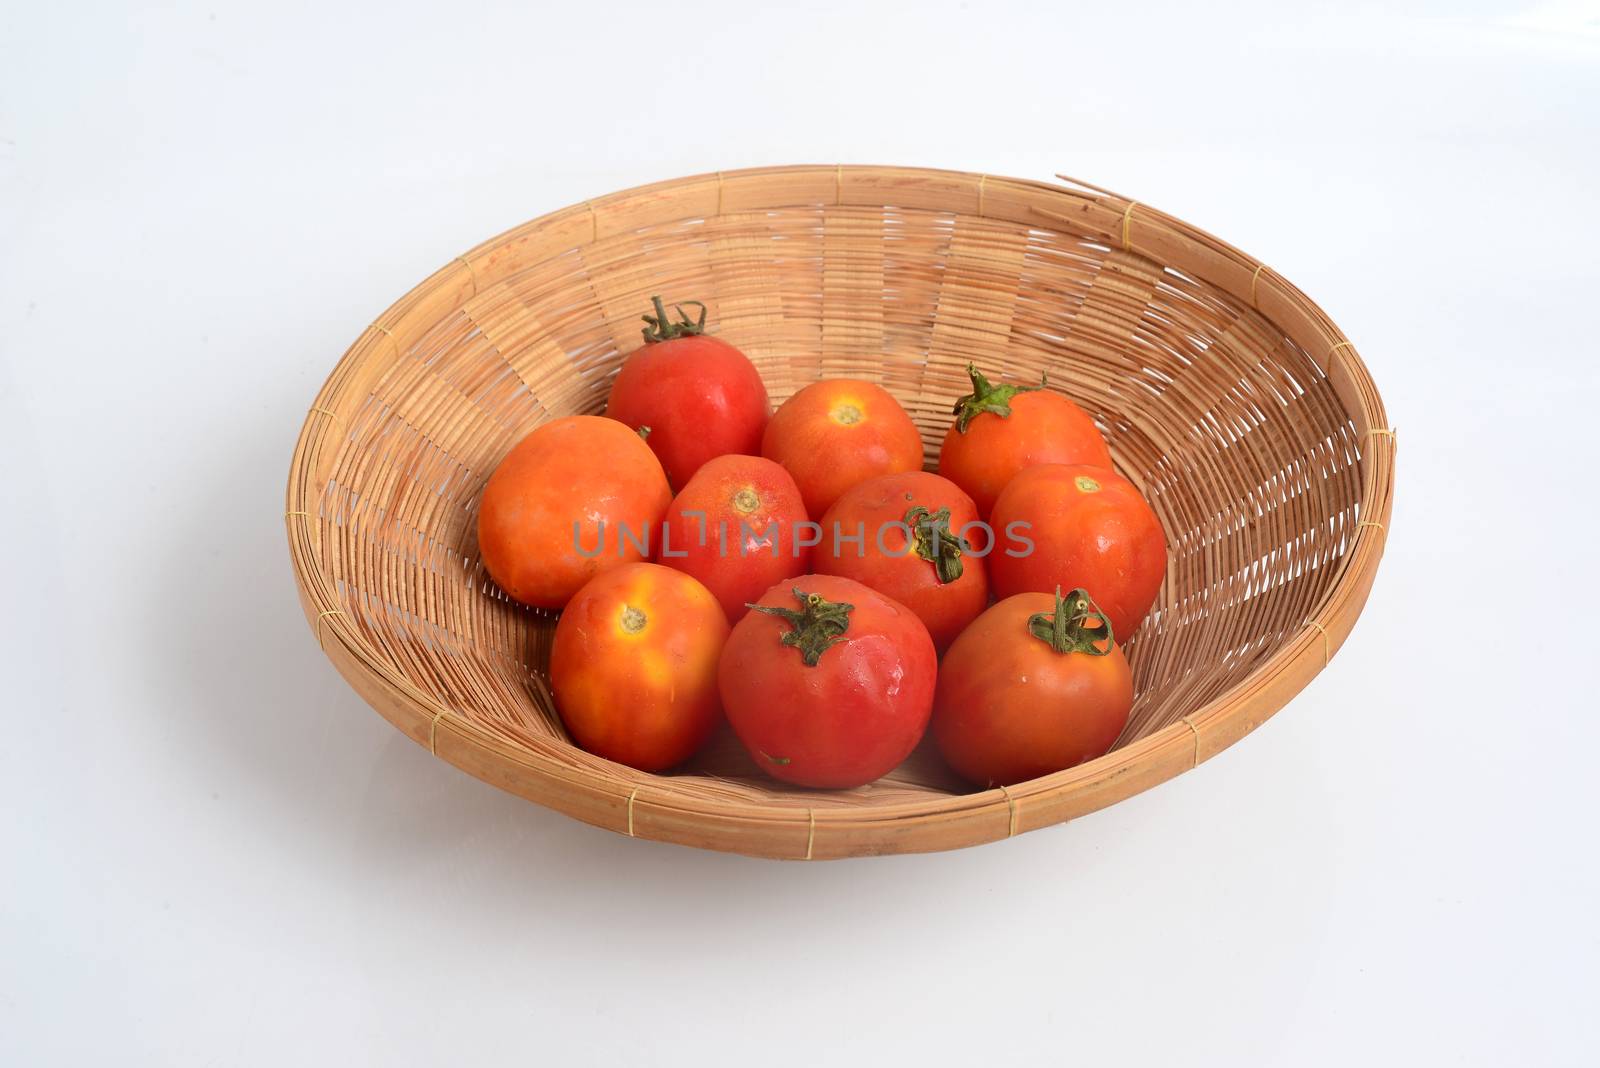 Tomato, (Solanum lycopersicum), flowering plant of the nightshade family (Solanaceae), cultivated extensively for its edible fruits. by ideation90